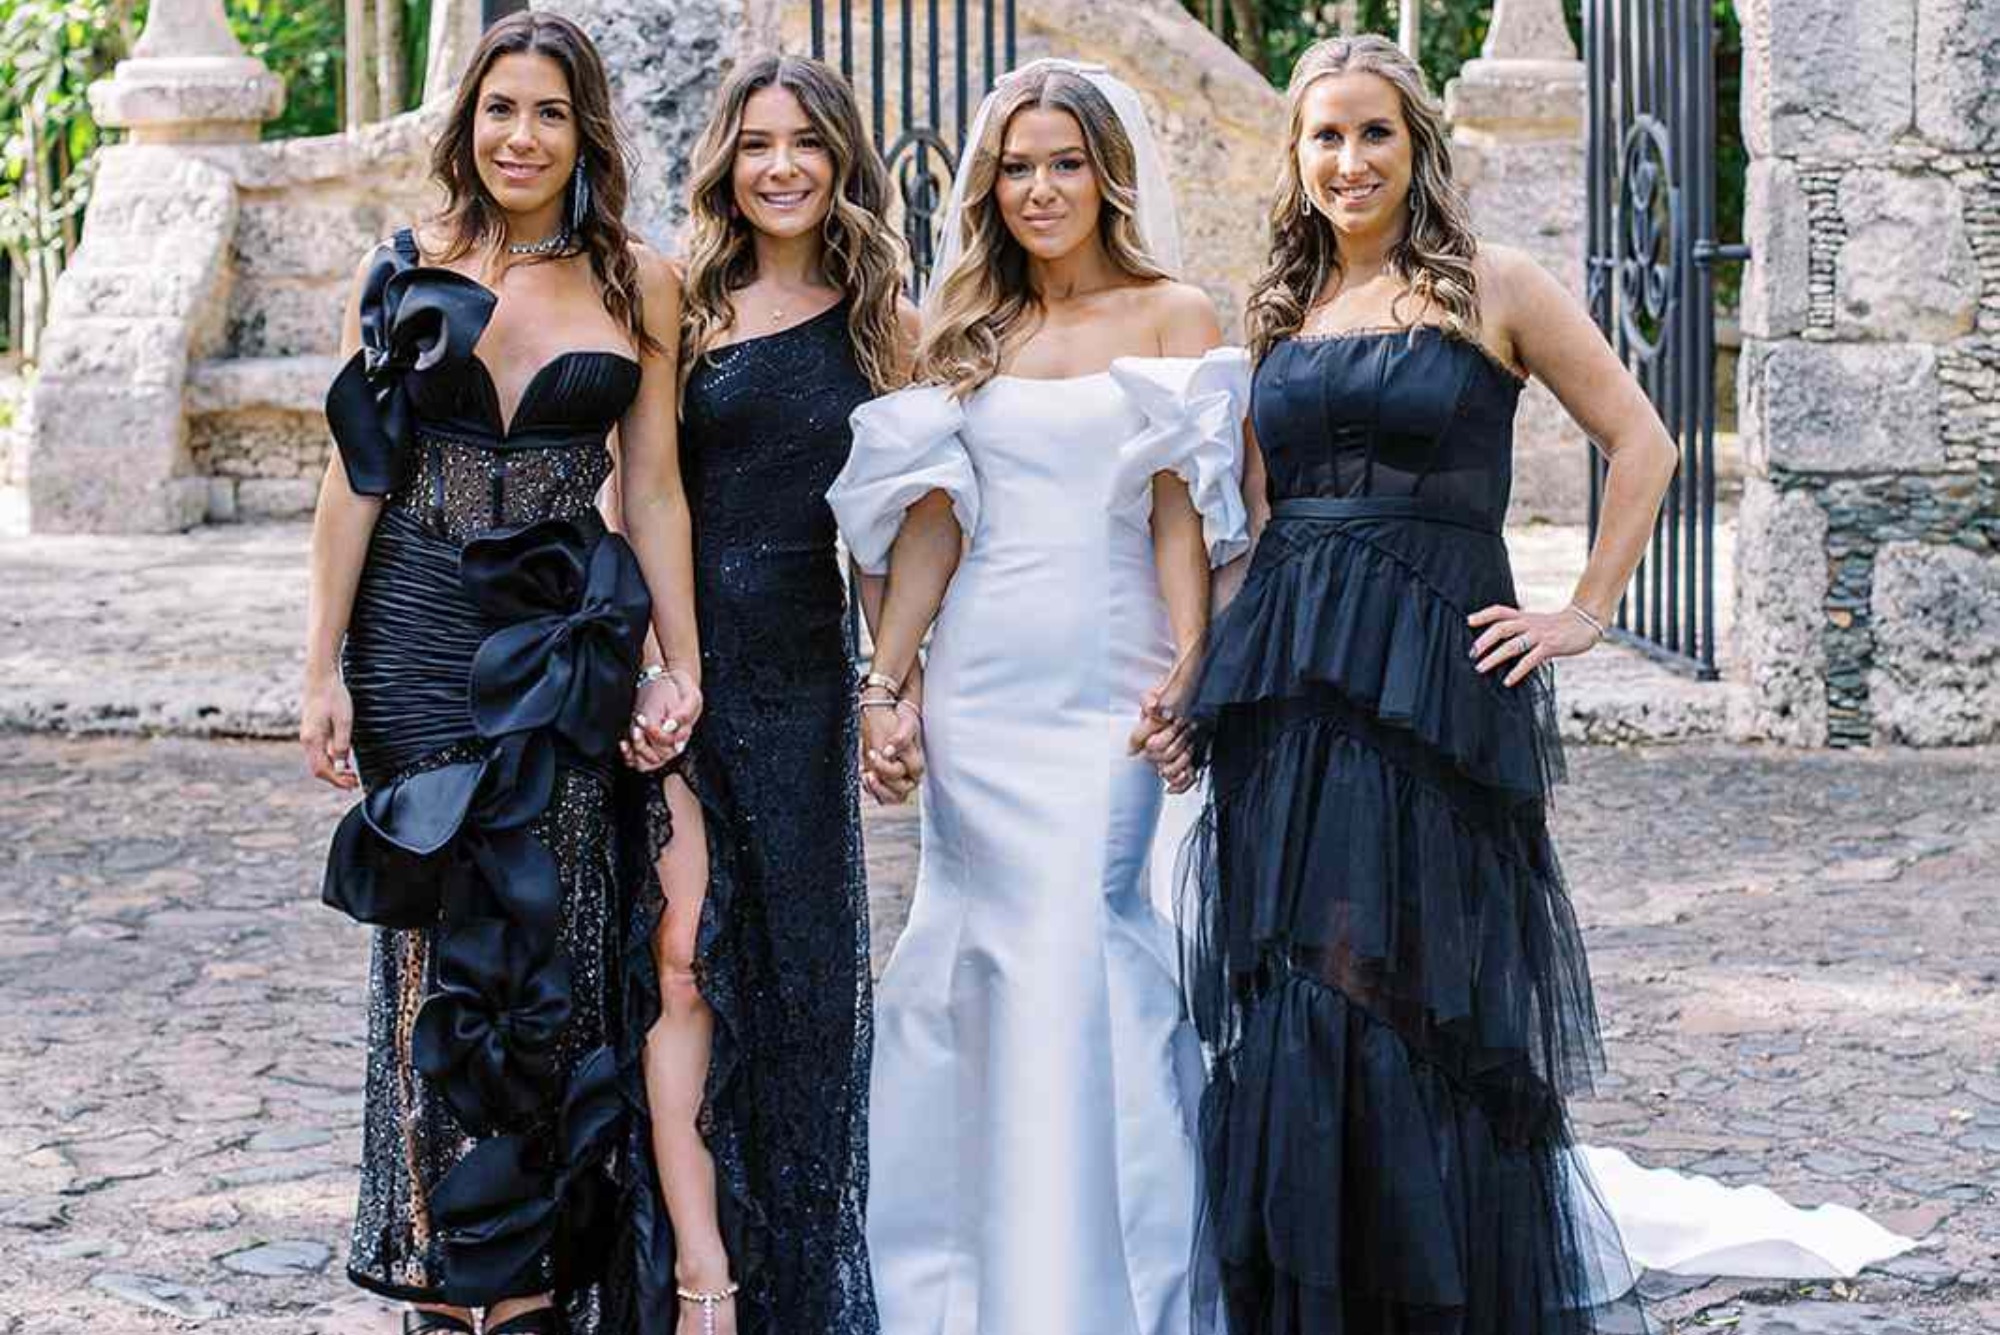 How To Dress Up a Black Dress for a Wedding